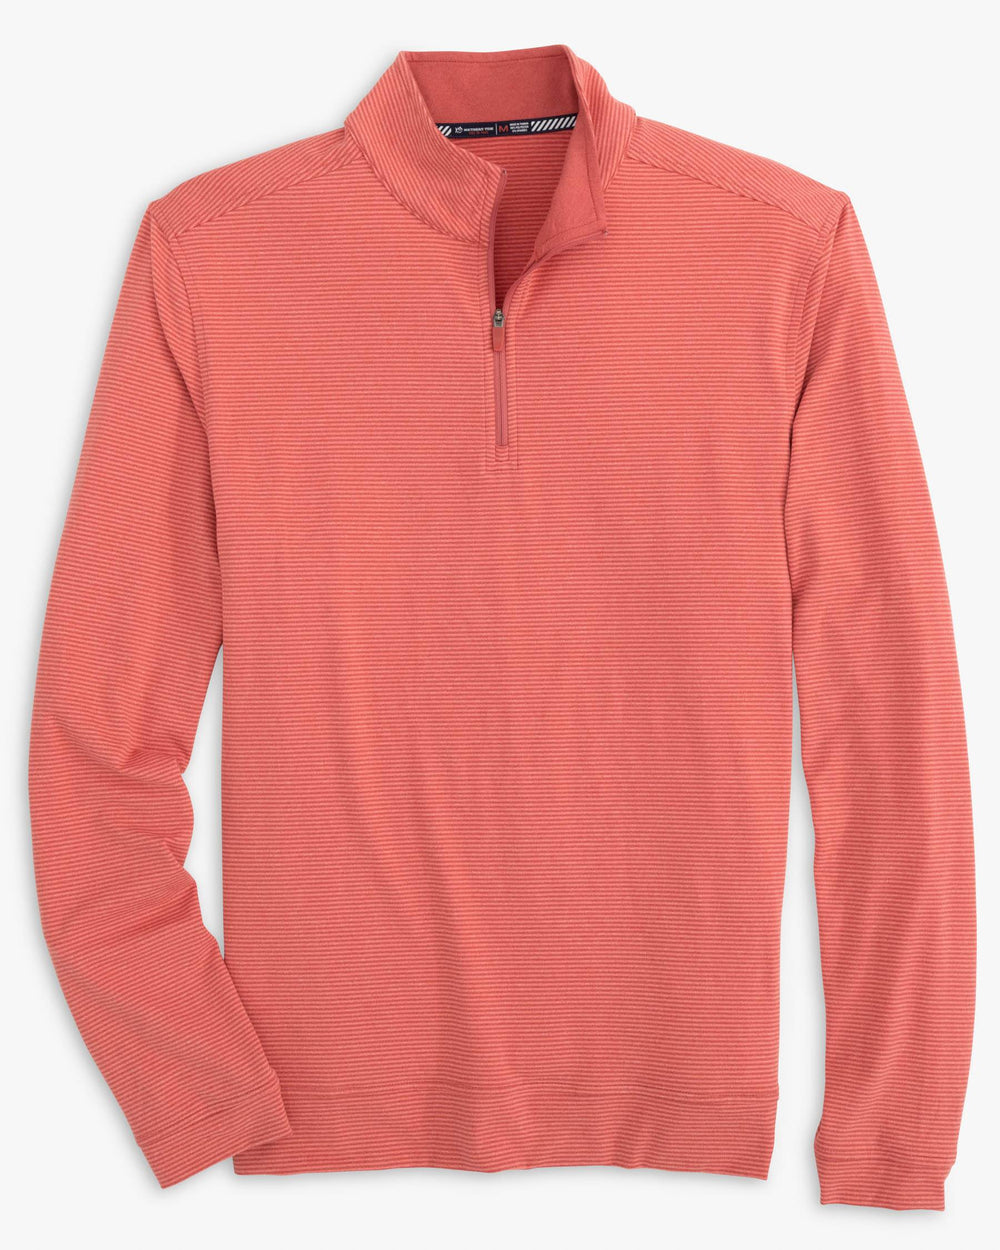 The front view of the Cruiser Heather Micro Striped Performance Quarter Zip Pullover by Southern Tide - Heather Mineral Red